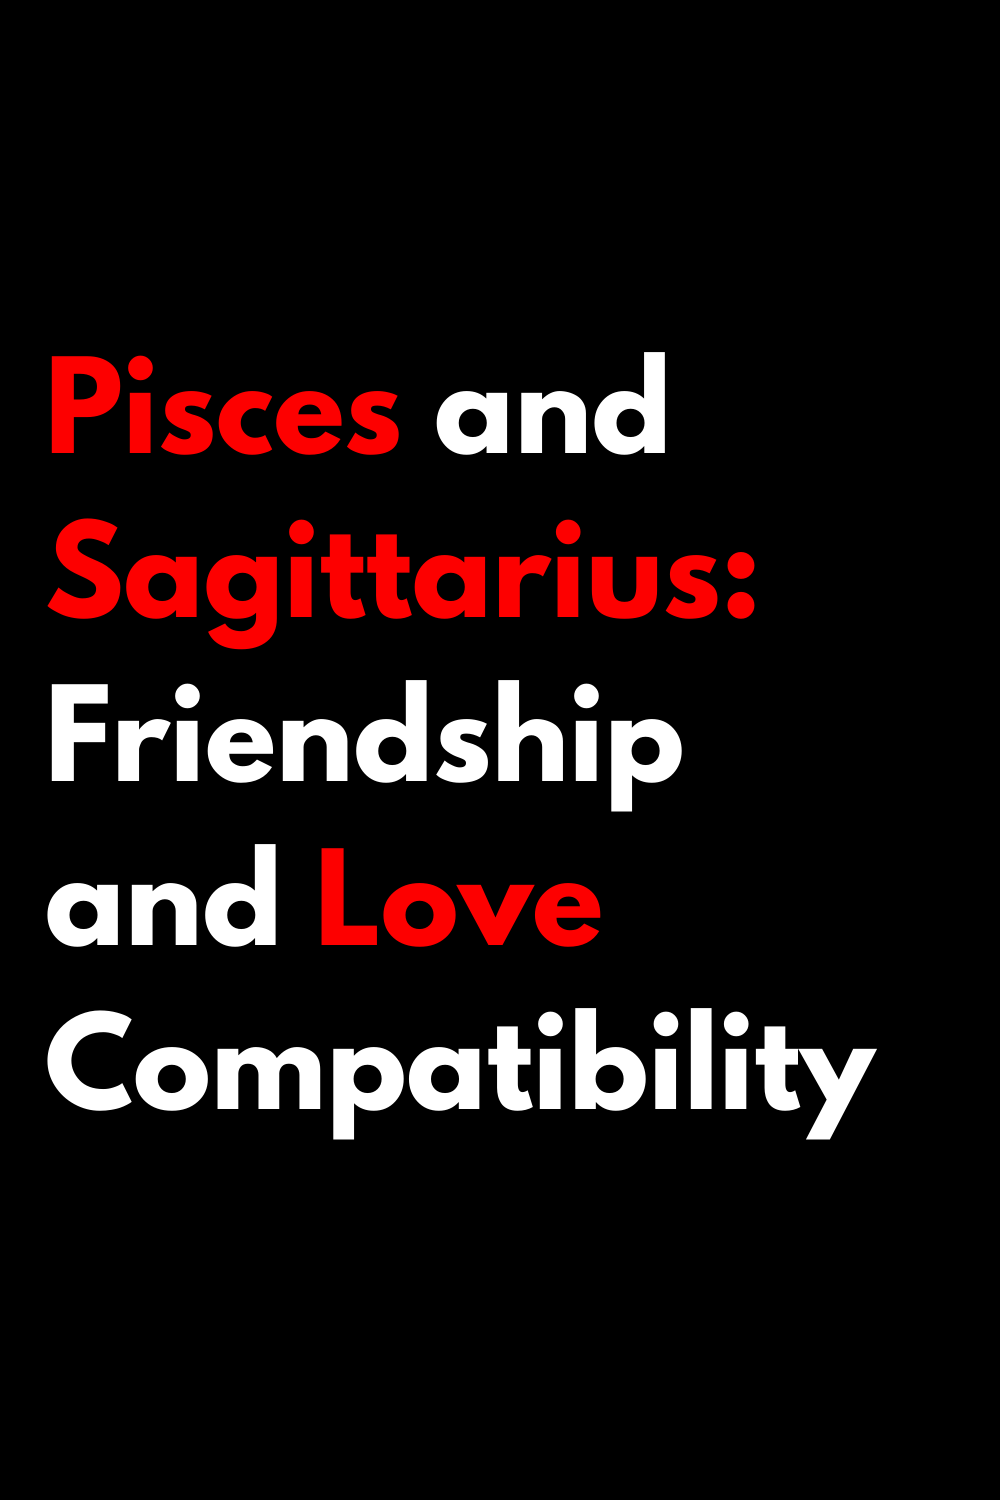 Pisces and Sagittarius: Friendship and Love Compatibility